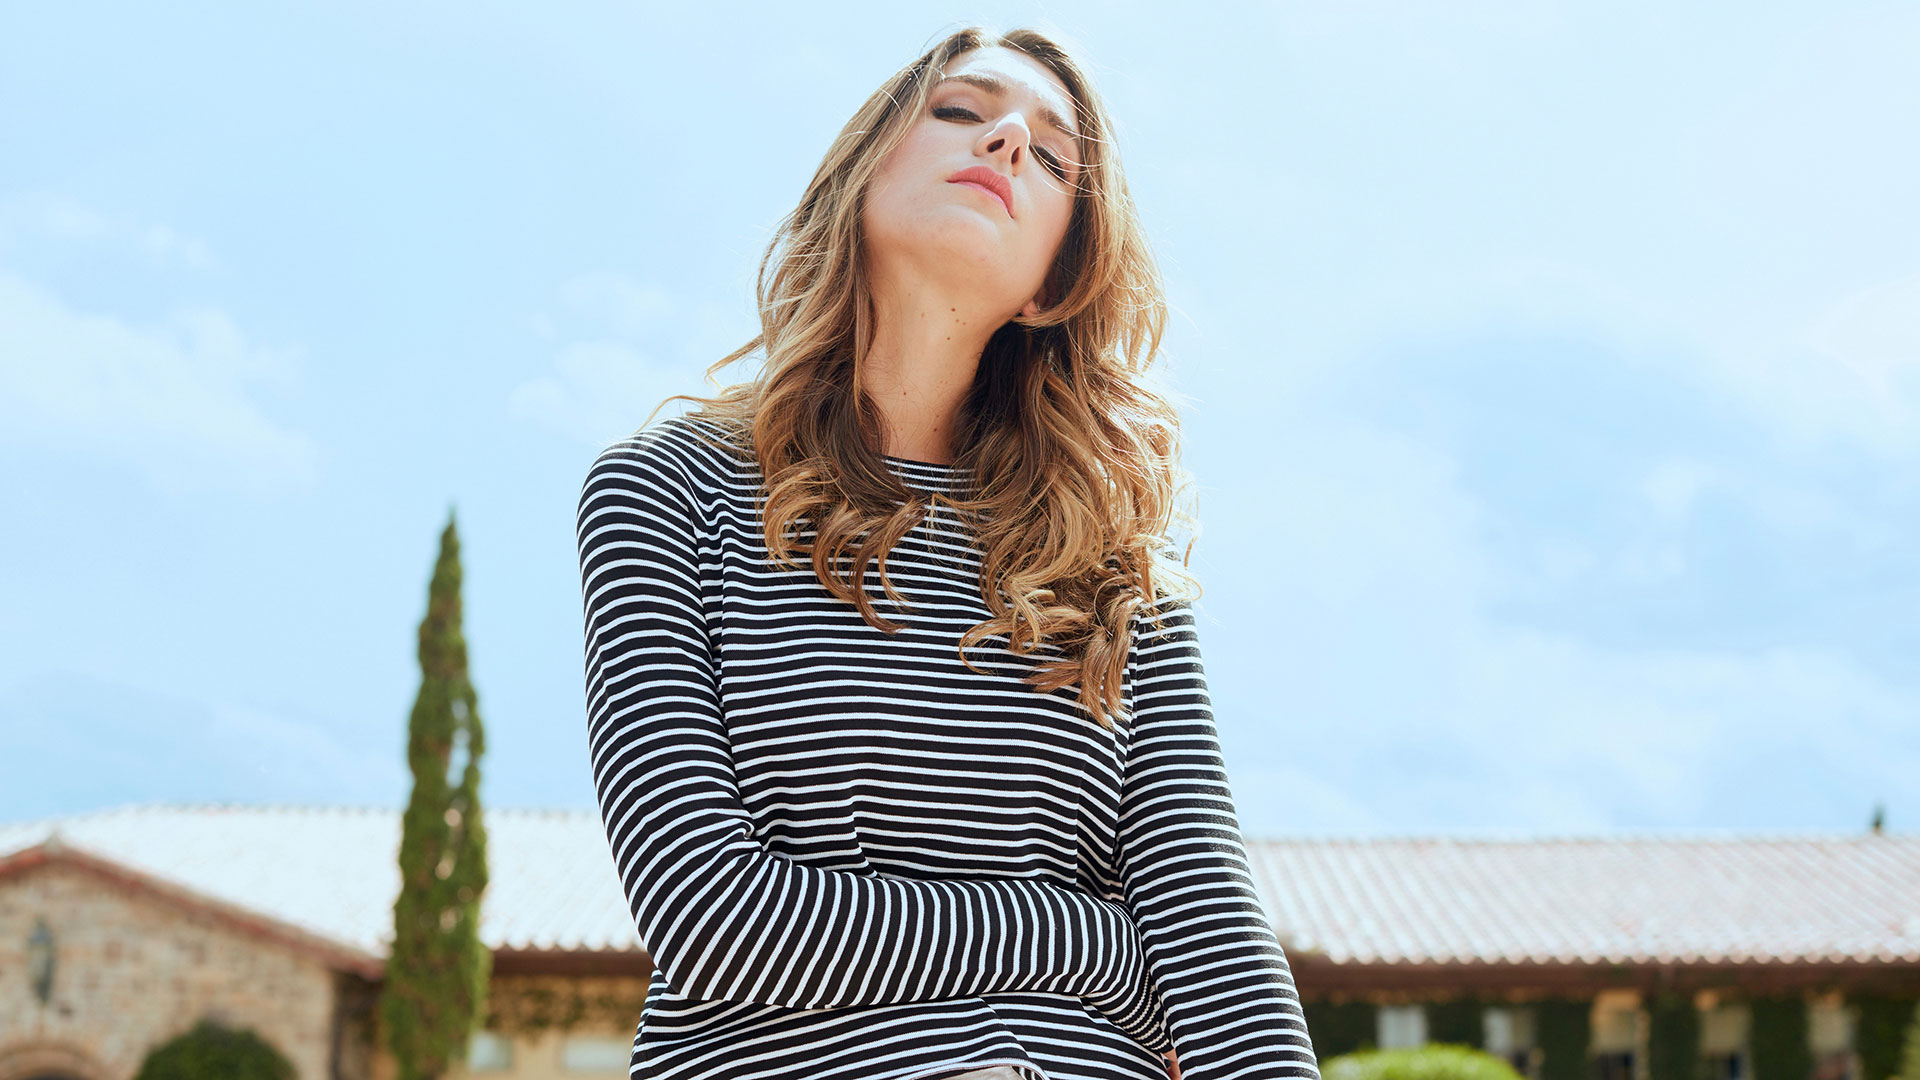 Fashion model in striped shirt on location photographed by commercial photographer Kate Benson.